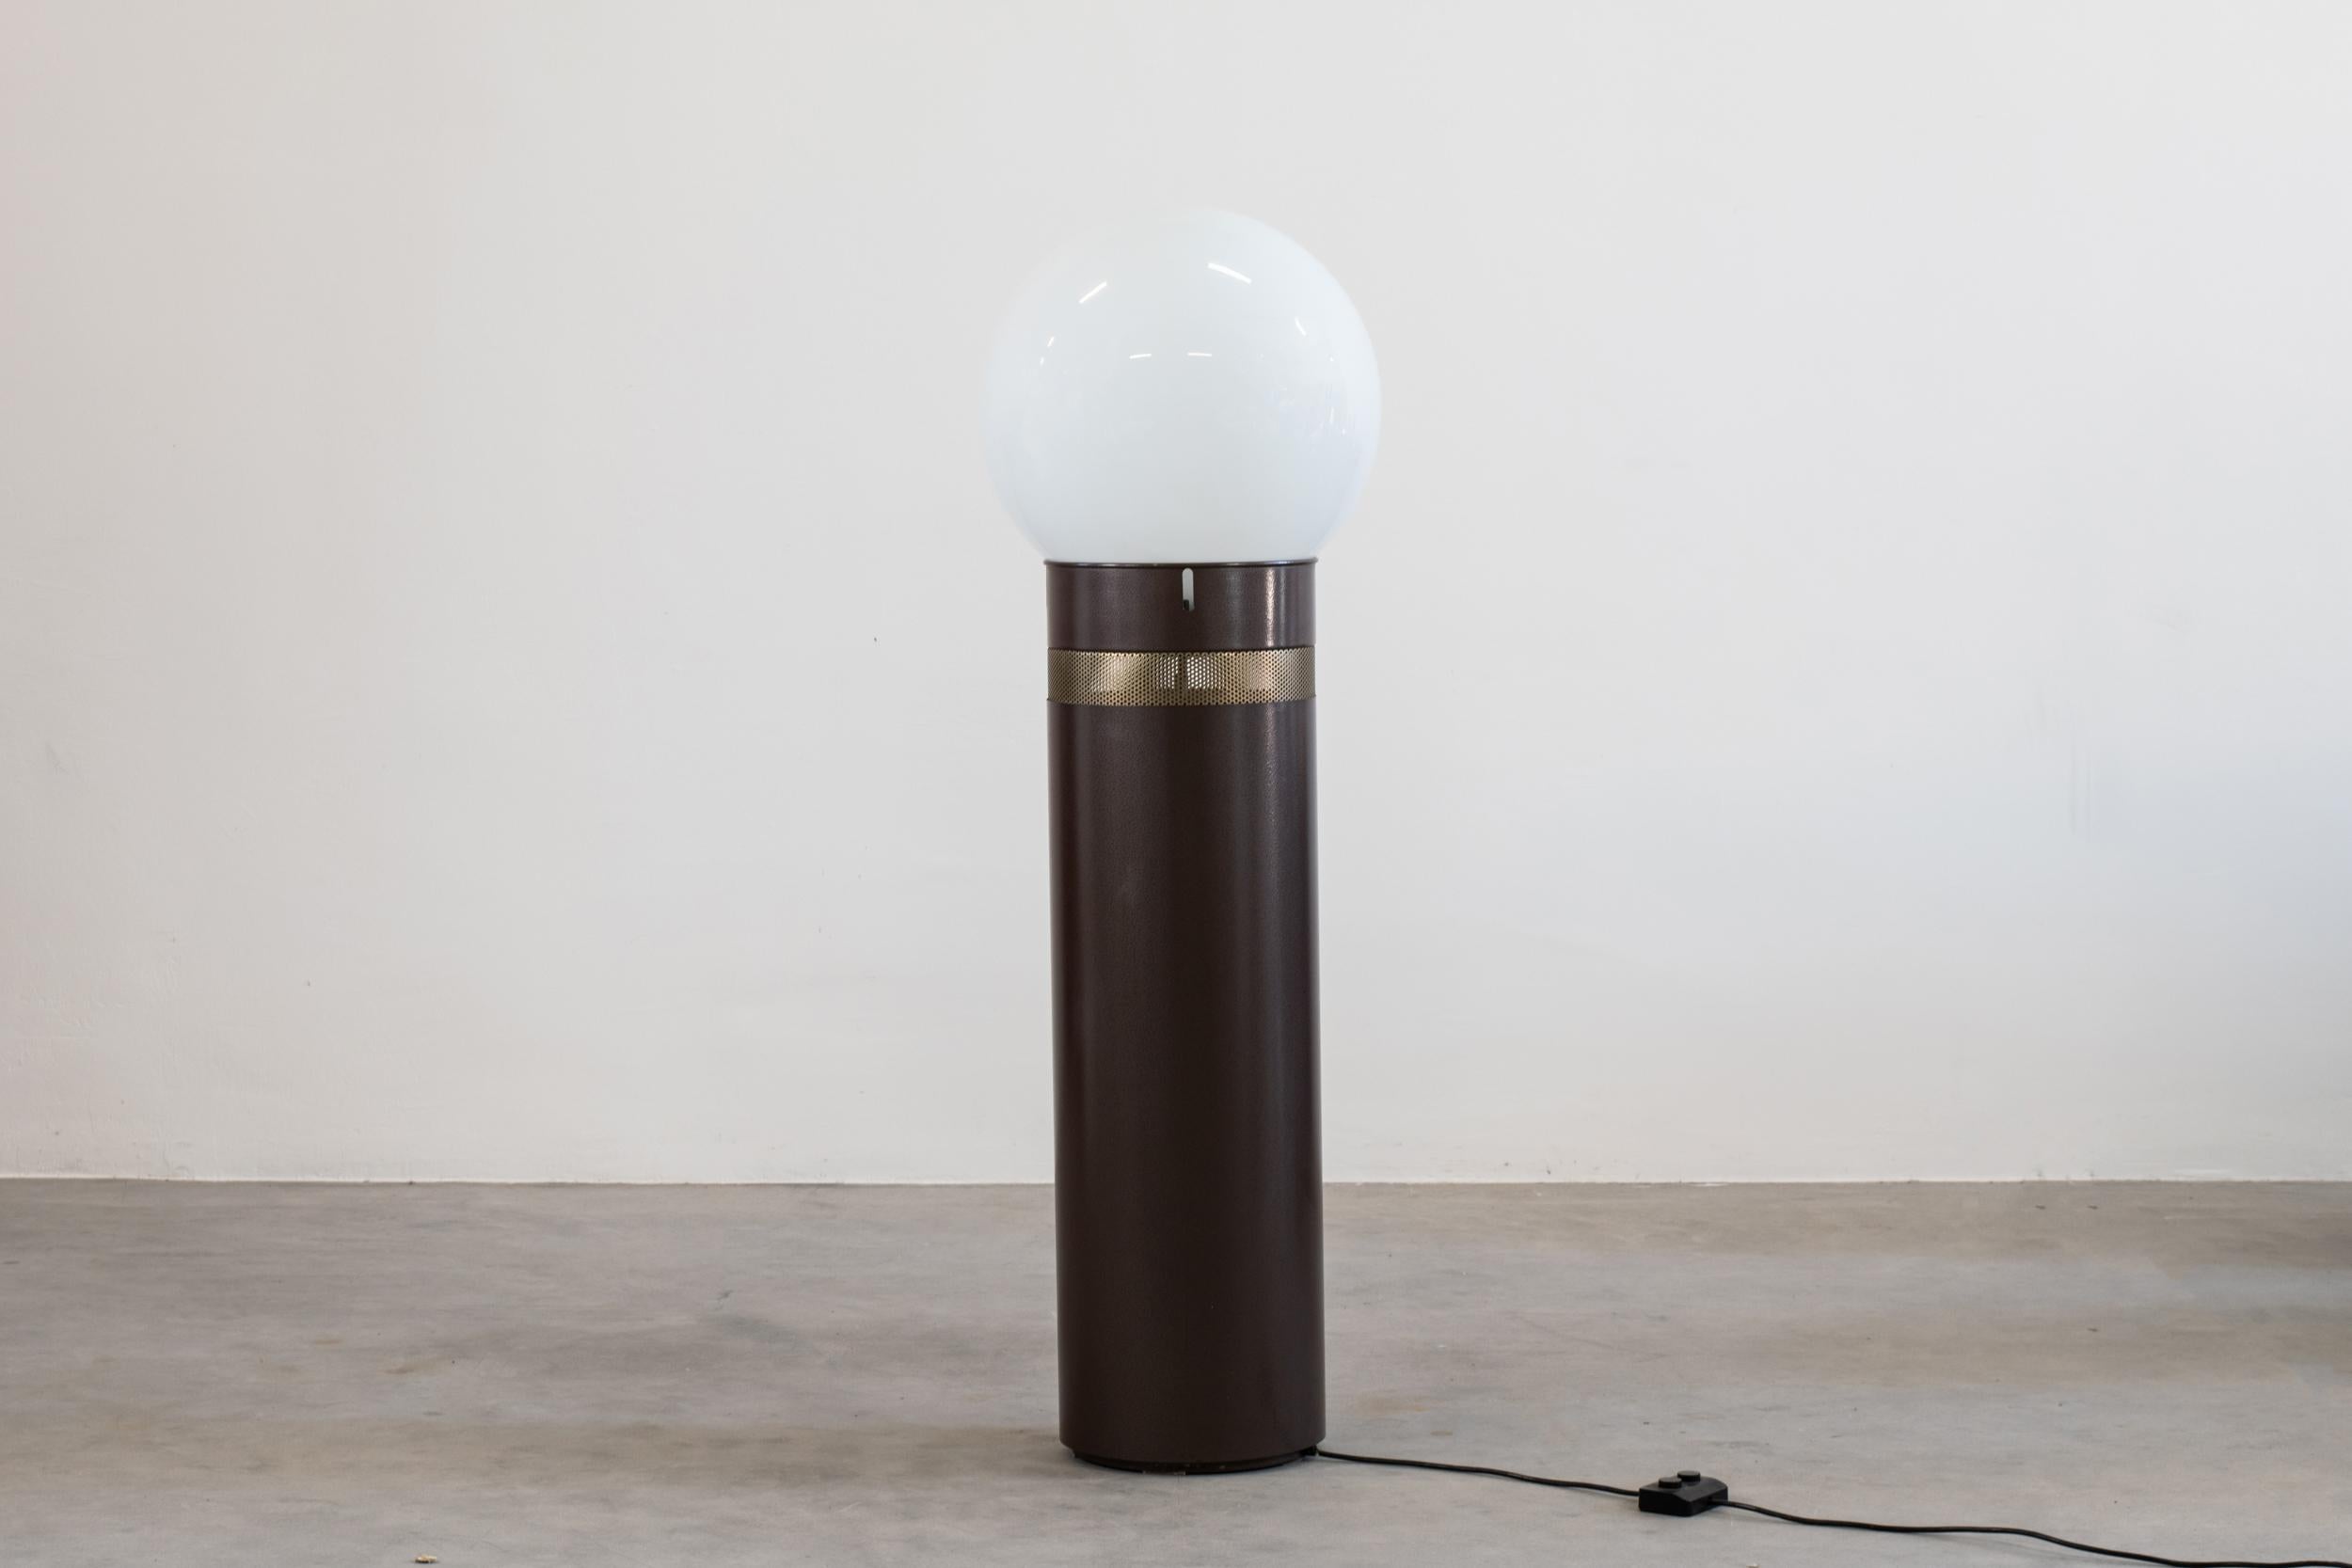 Oracolo floor lamp with a cilindical basement in brown lacquered metal with a pierced stainless steel section, and a blown glass diffuser. 

This lamp was designed by Gae Aulenti in 1969 for Artemide Italy.

Gae Aulenti was a prominent postwar